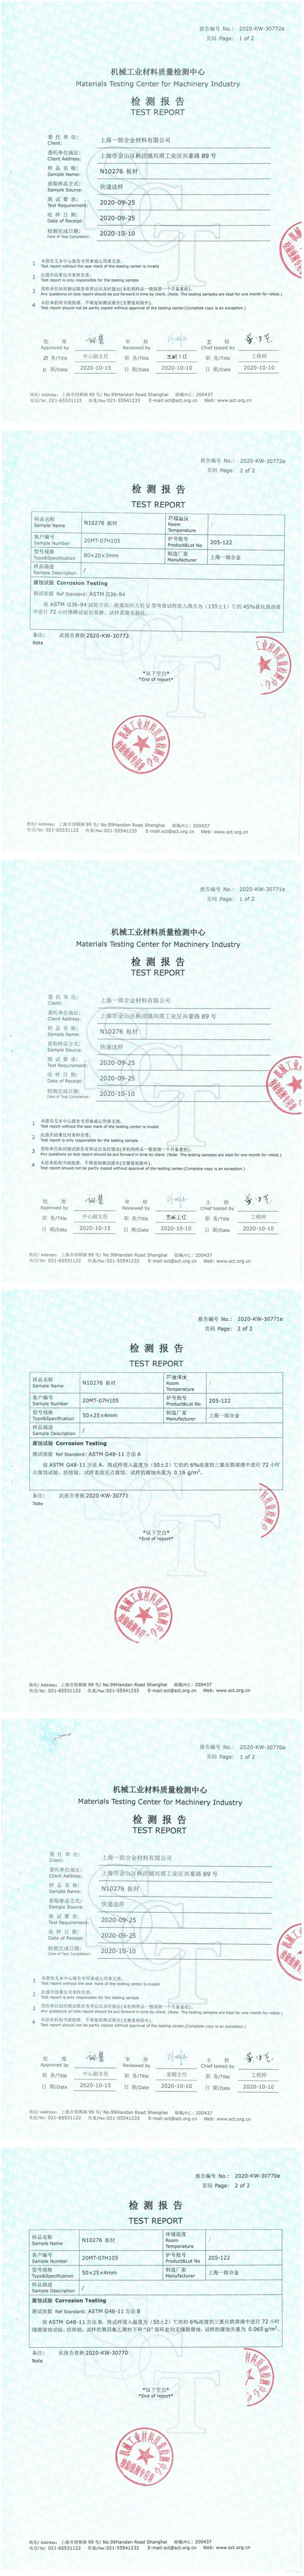 Jiaxing MT stainless steel co.,ltd. Certifications